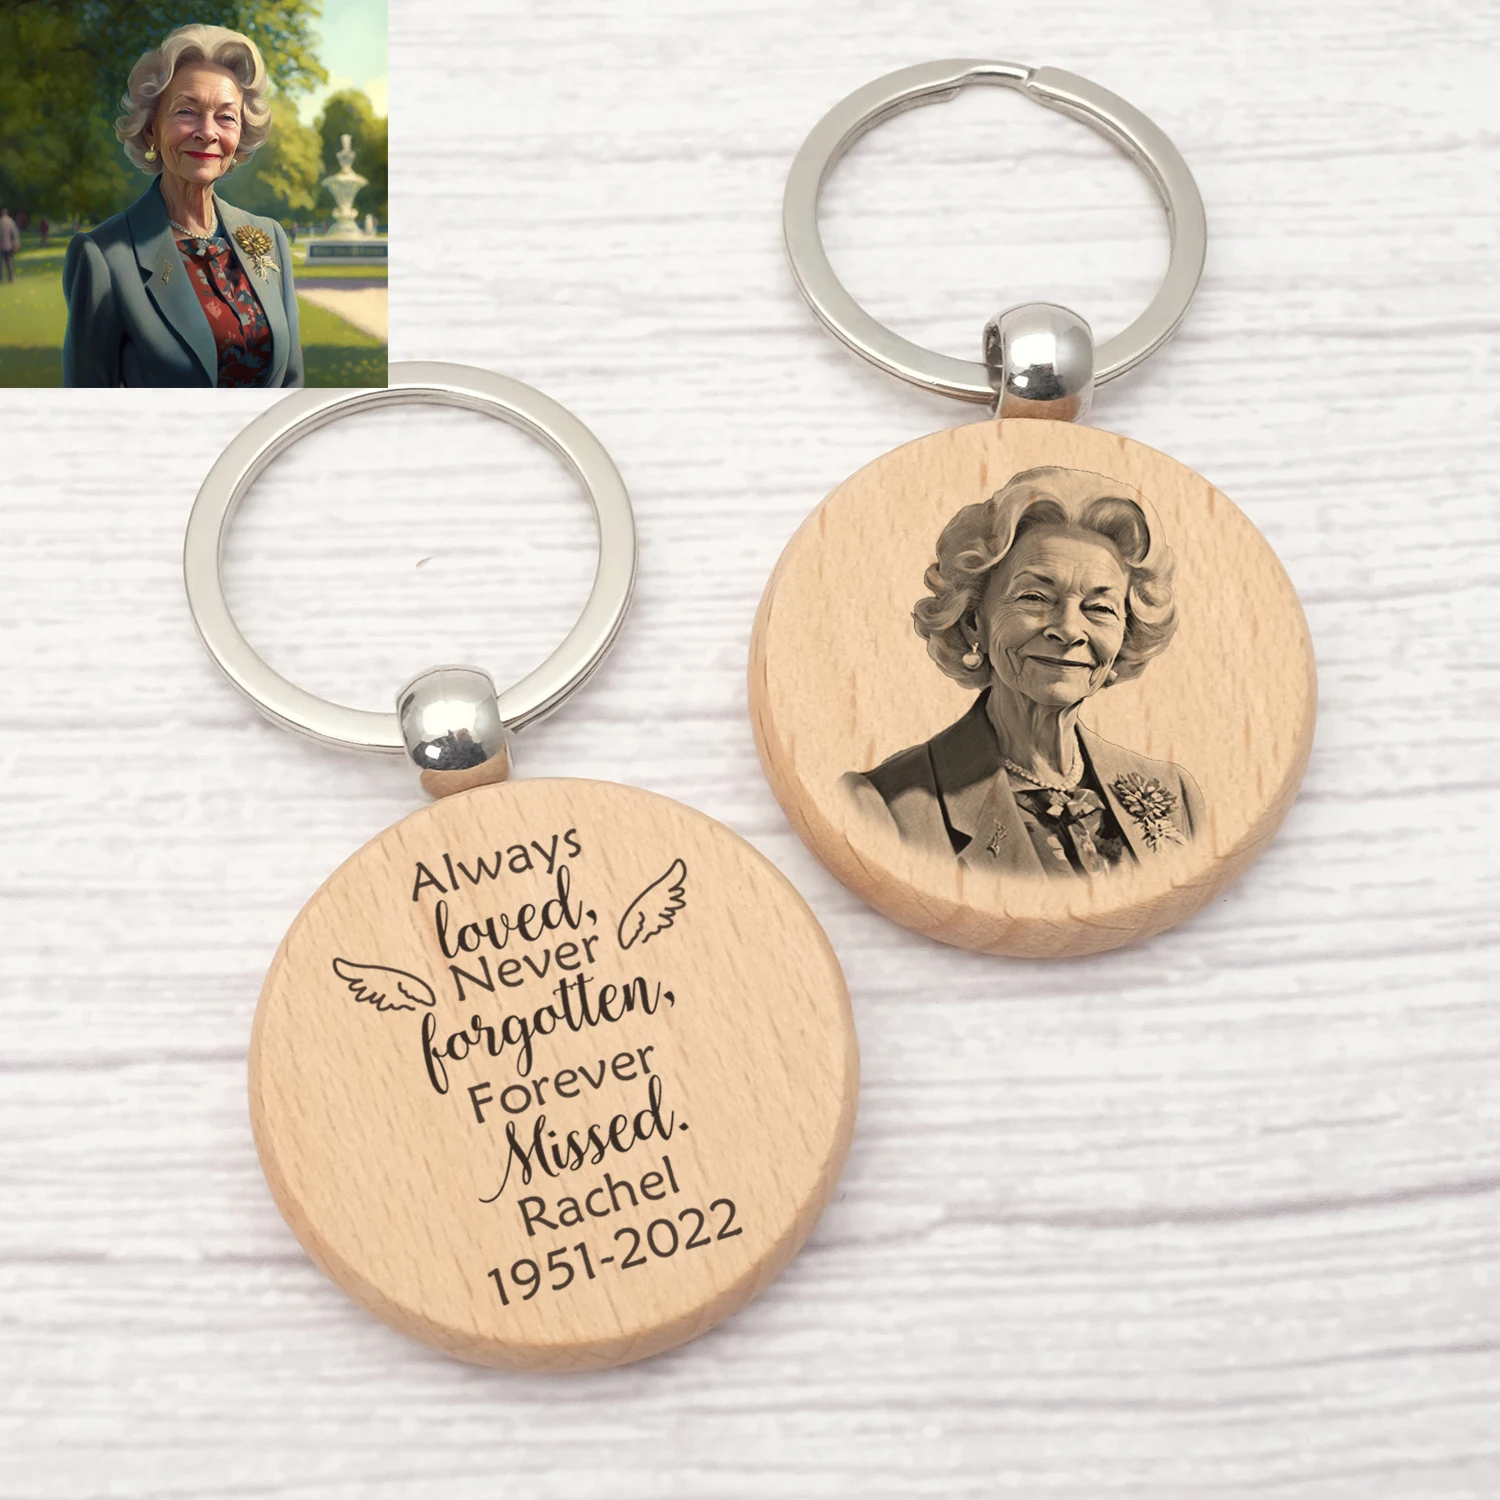 Custom Memorial Keychain Personalized Photo Key Ring Engraved Your Text Sympathy Gifts for Loss of Loved One Family Friends Gift